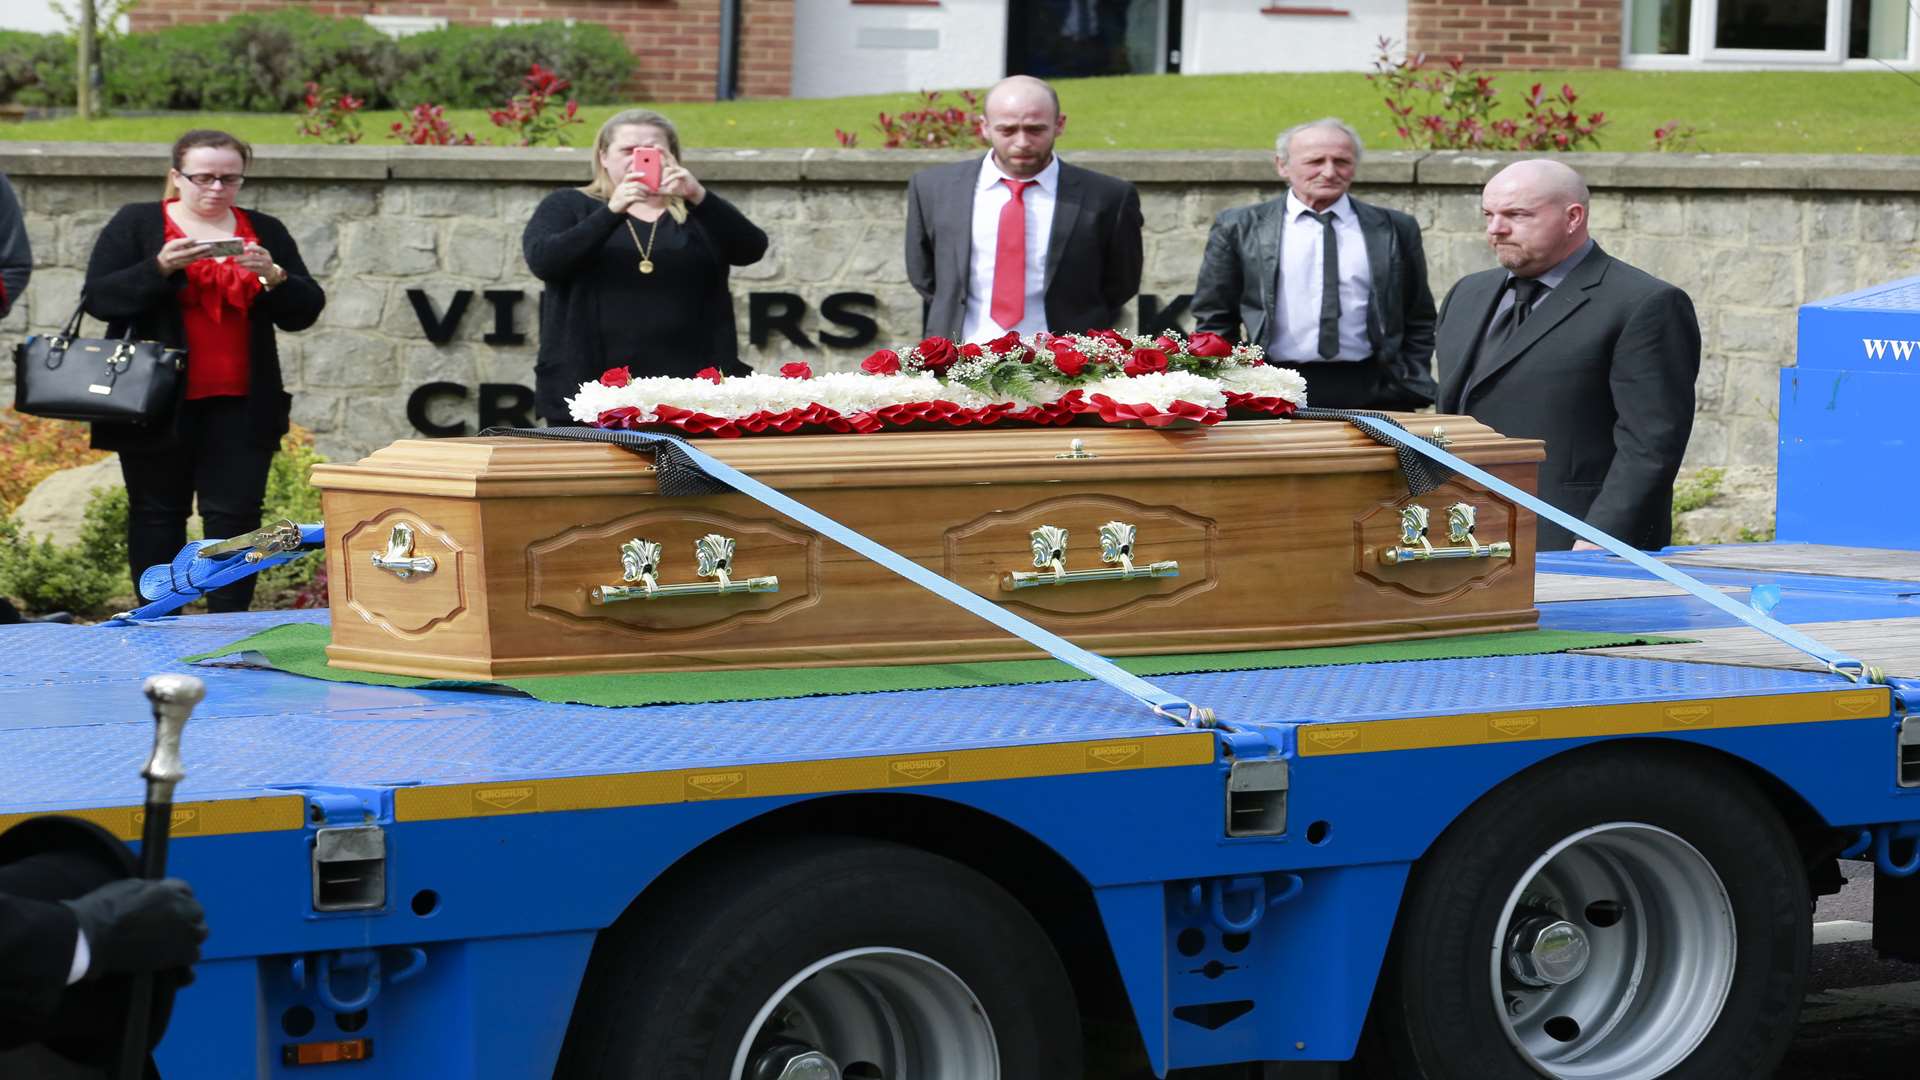 The coffin arrived on the back of a lorry. Picture: Martin Apps